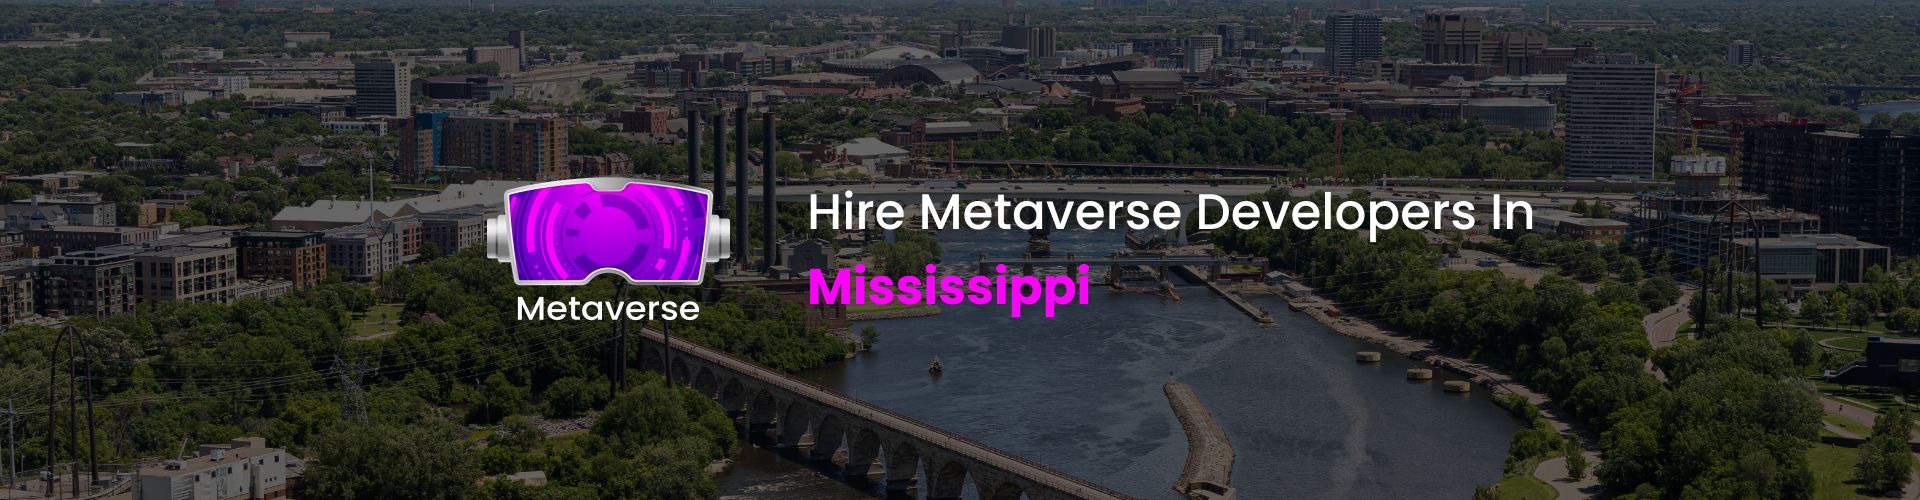 hire metaverse developers in mississippi